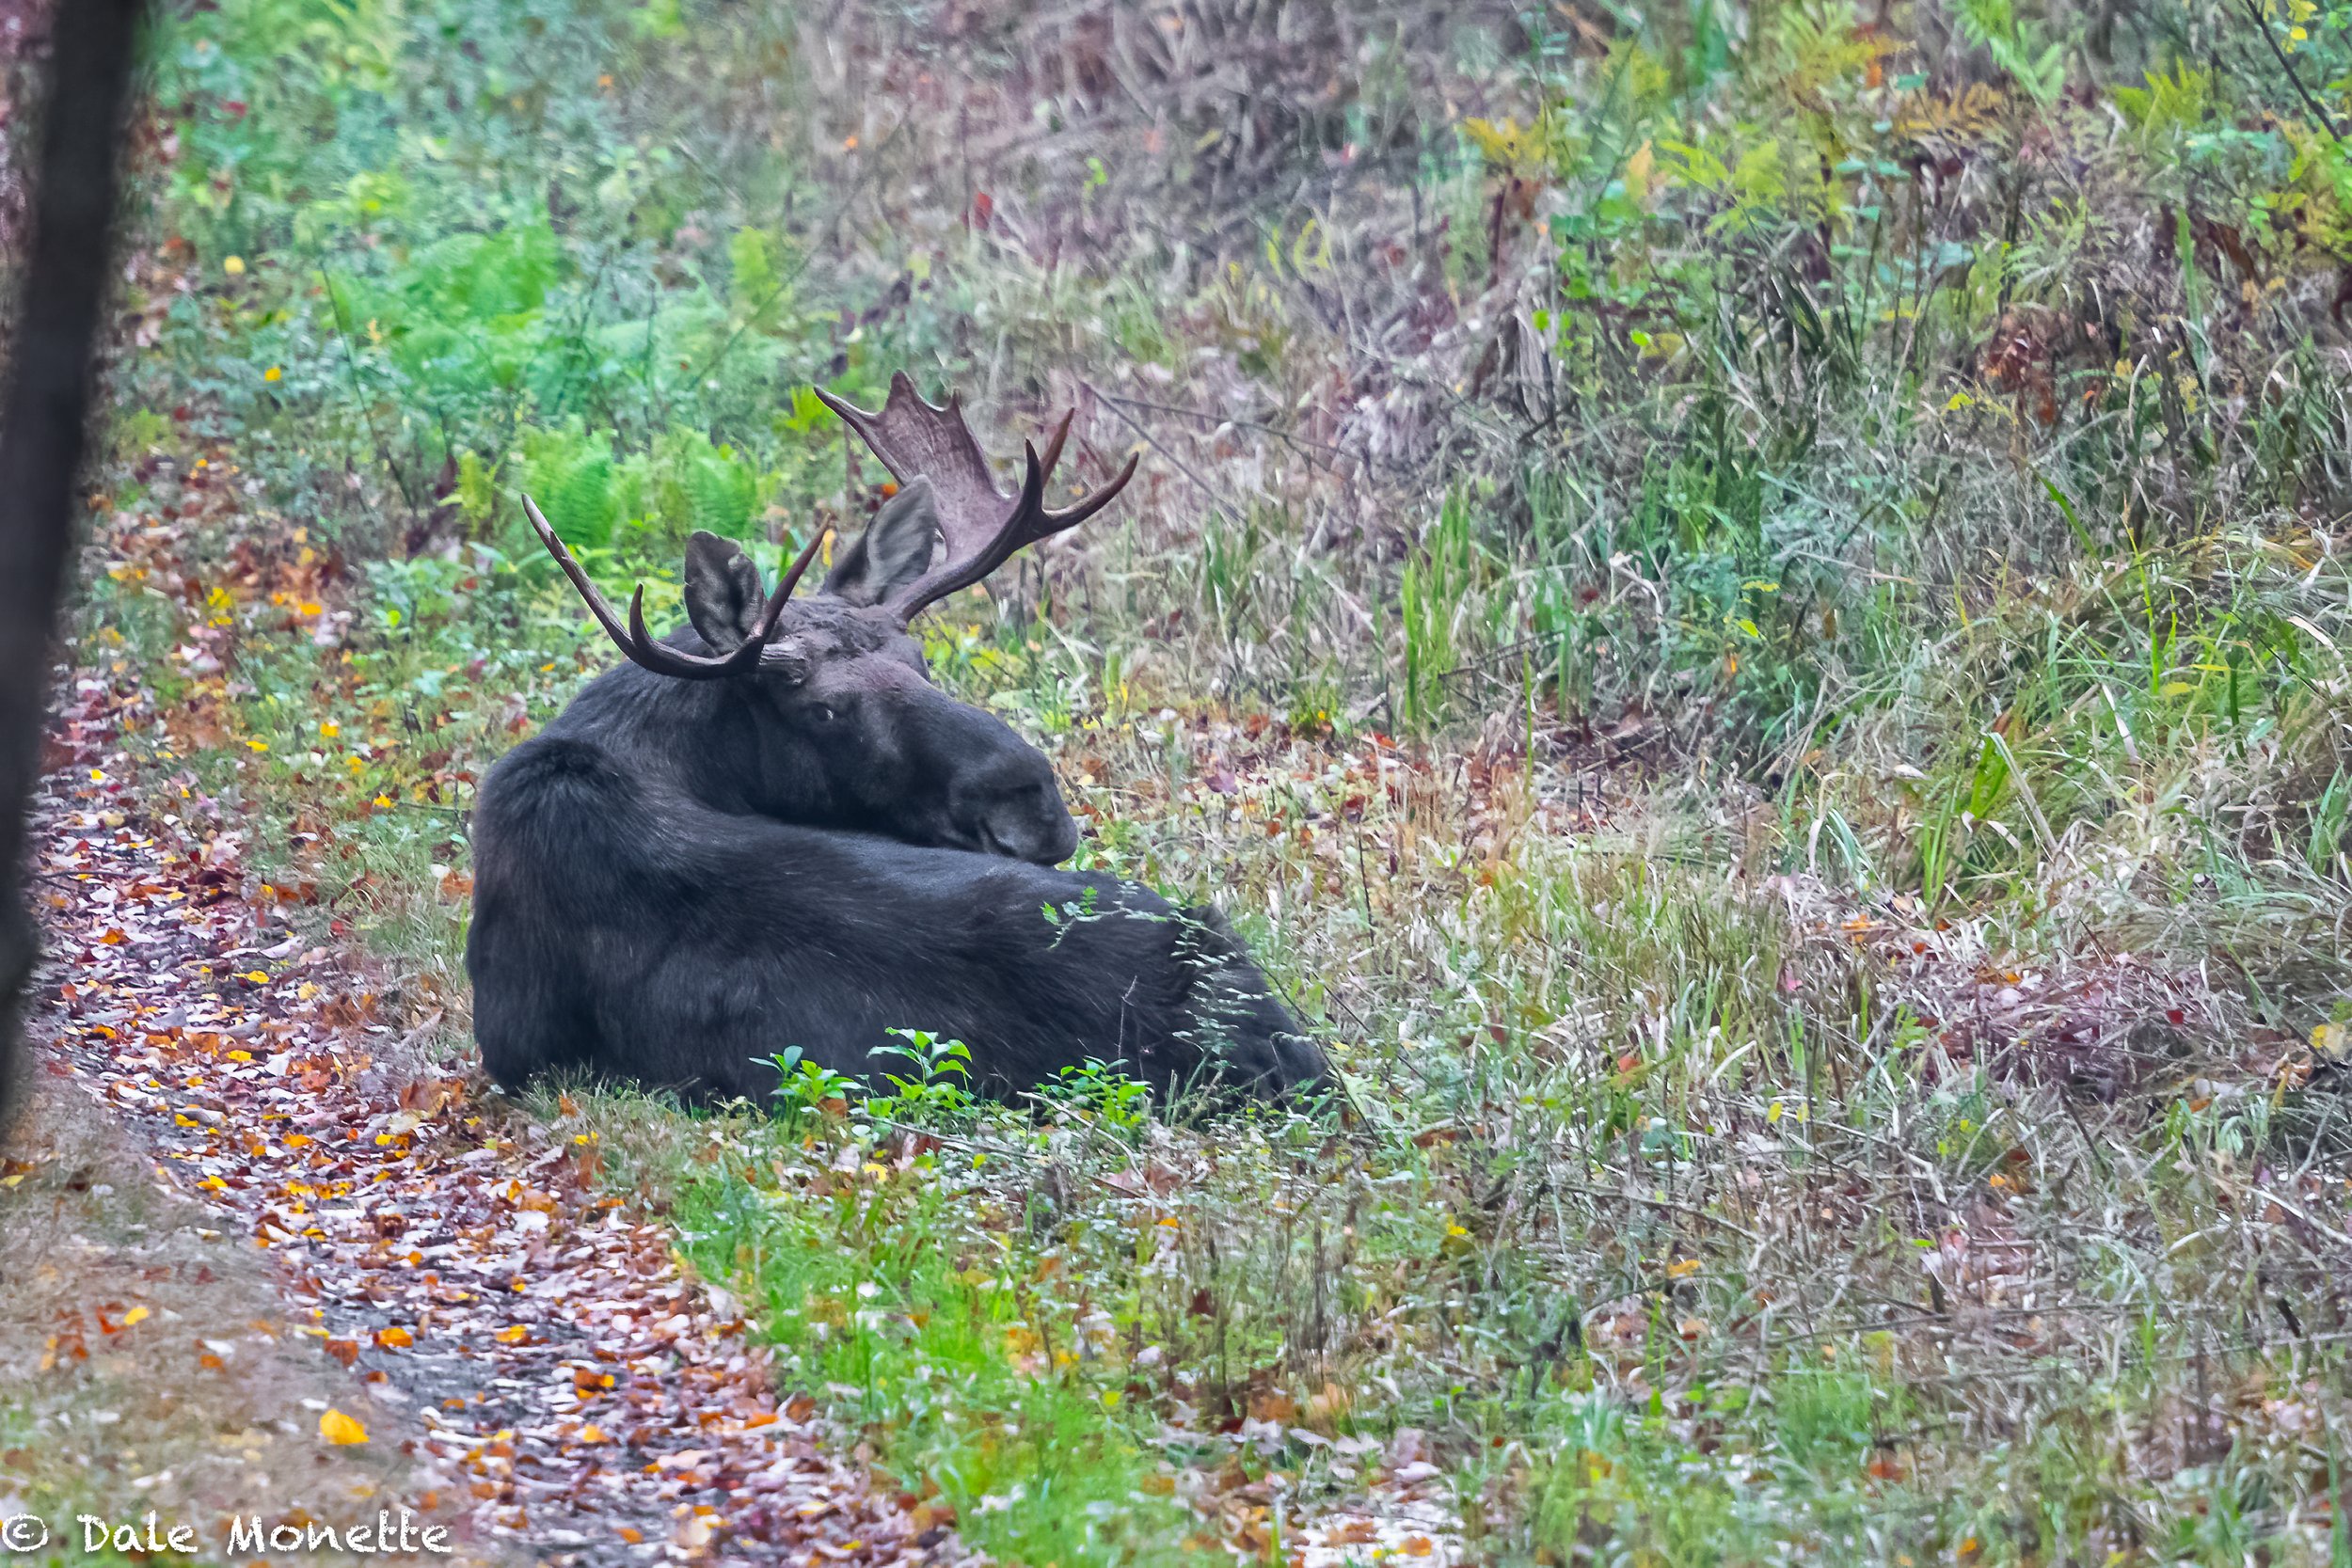   Heres something you don’t see often. A bull moose bedded down right by the road!  I watched him for about 45 minutes before he went off the road and into a small bog.  